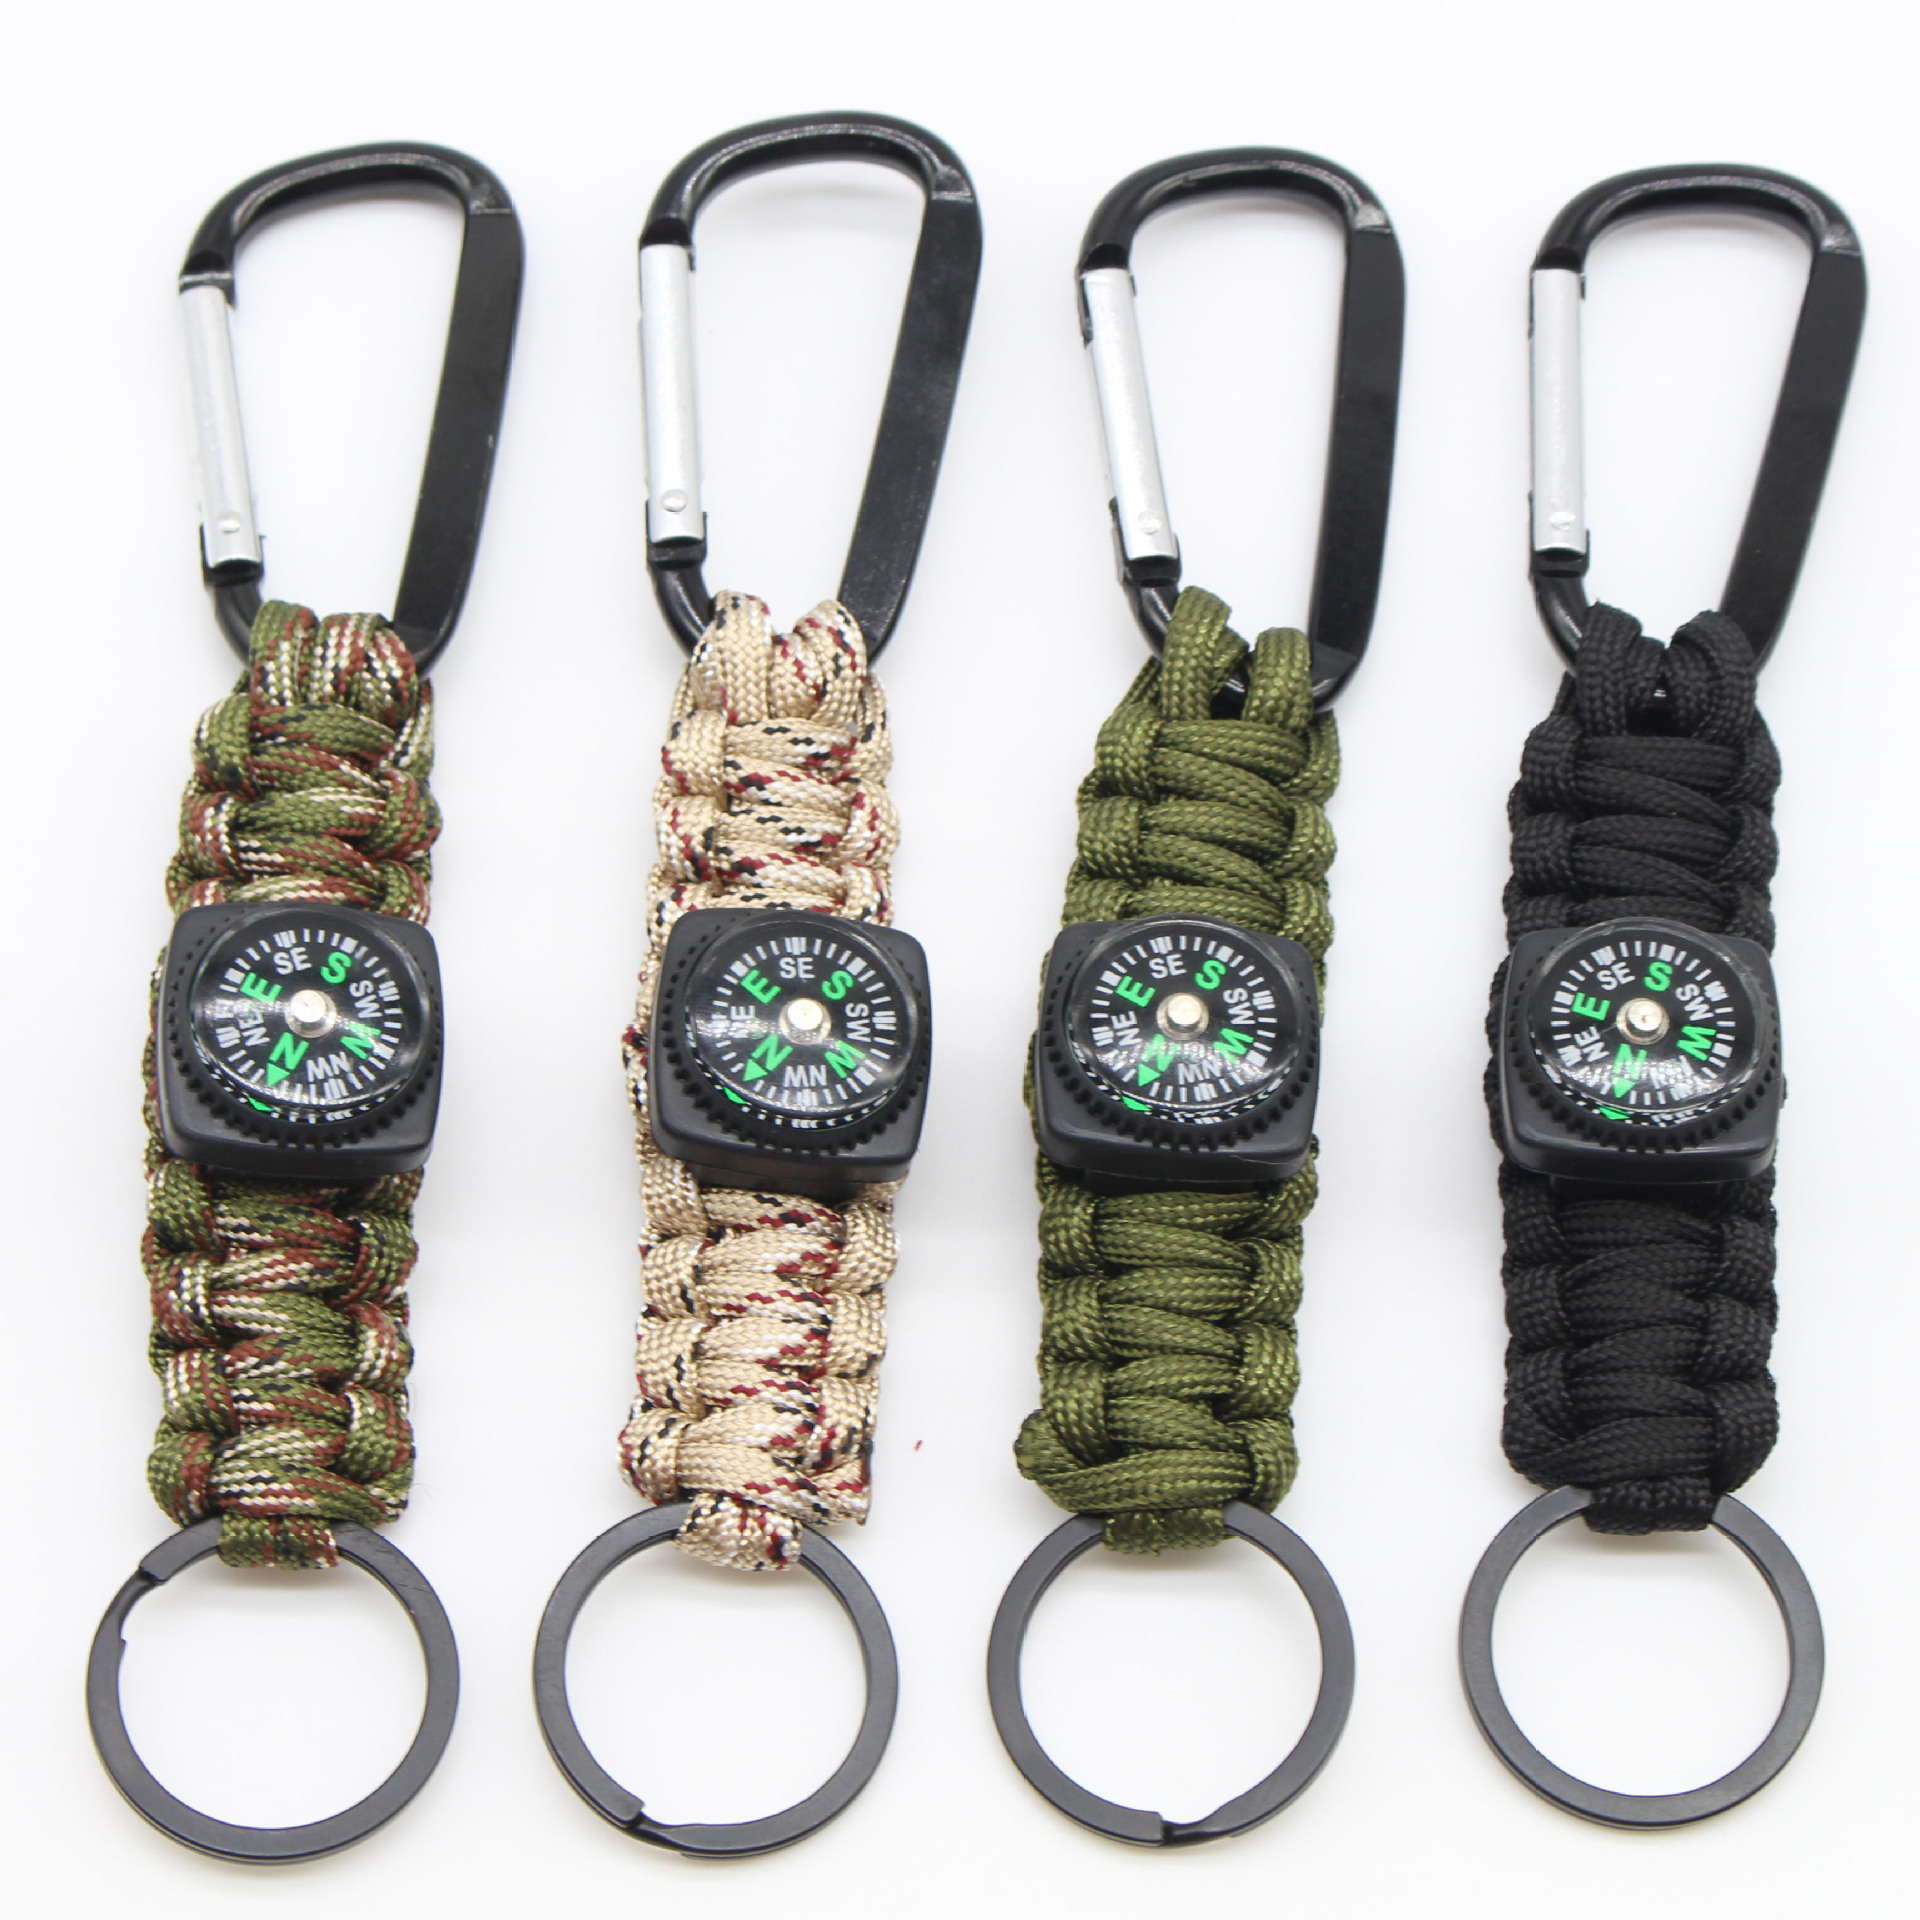 Carabiner Keychain, Paracord Compass Keychain Small Aluminum Clip D Ring for Camping, Hiking, Fishing